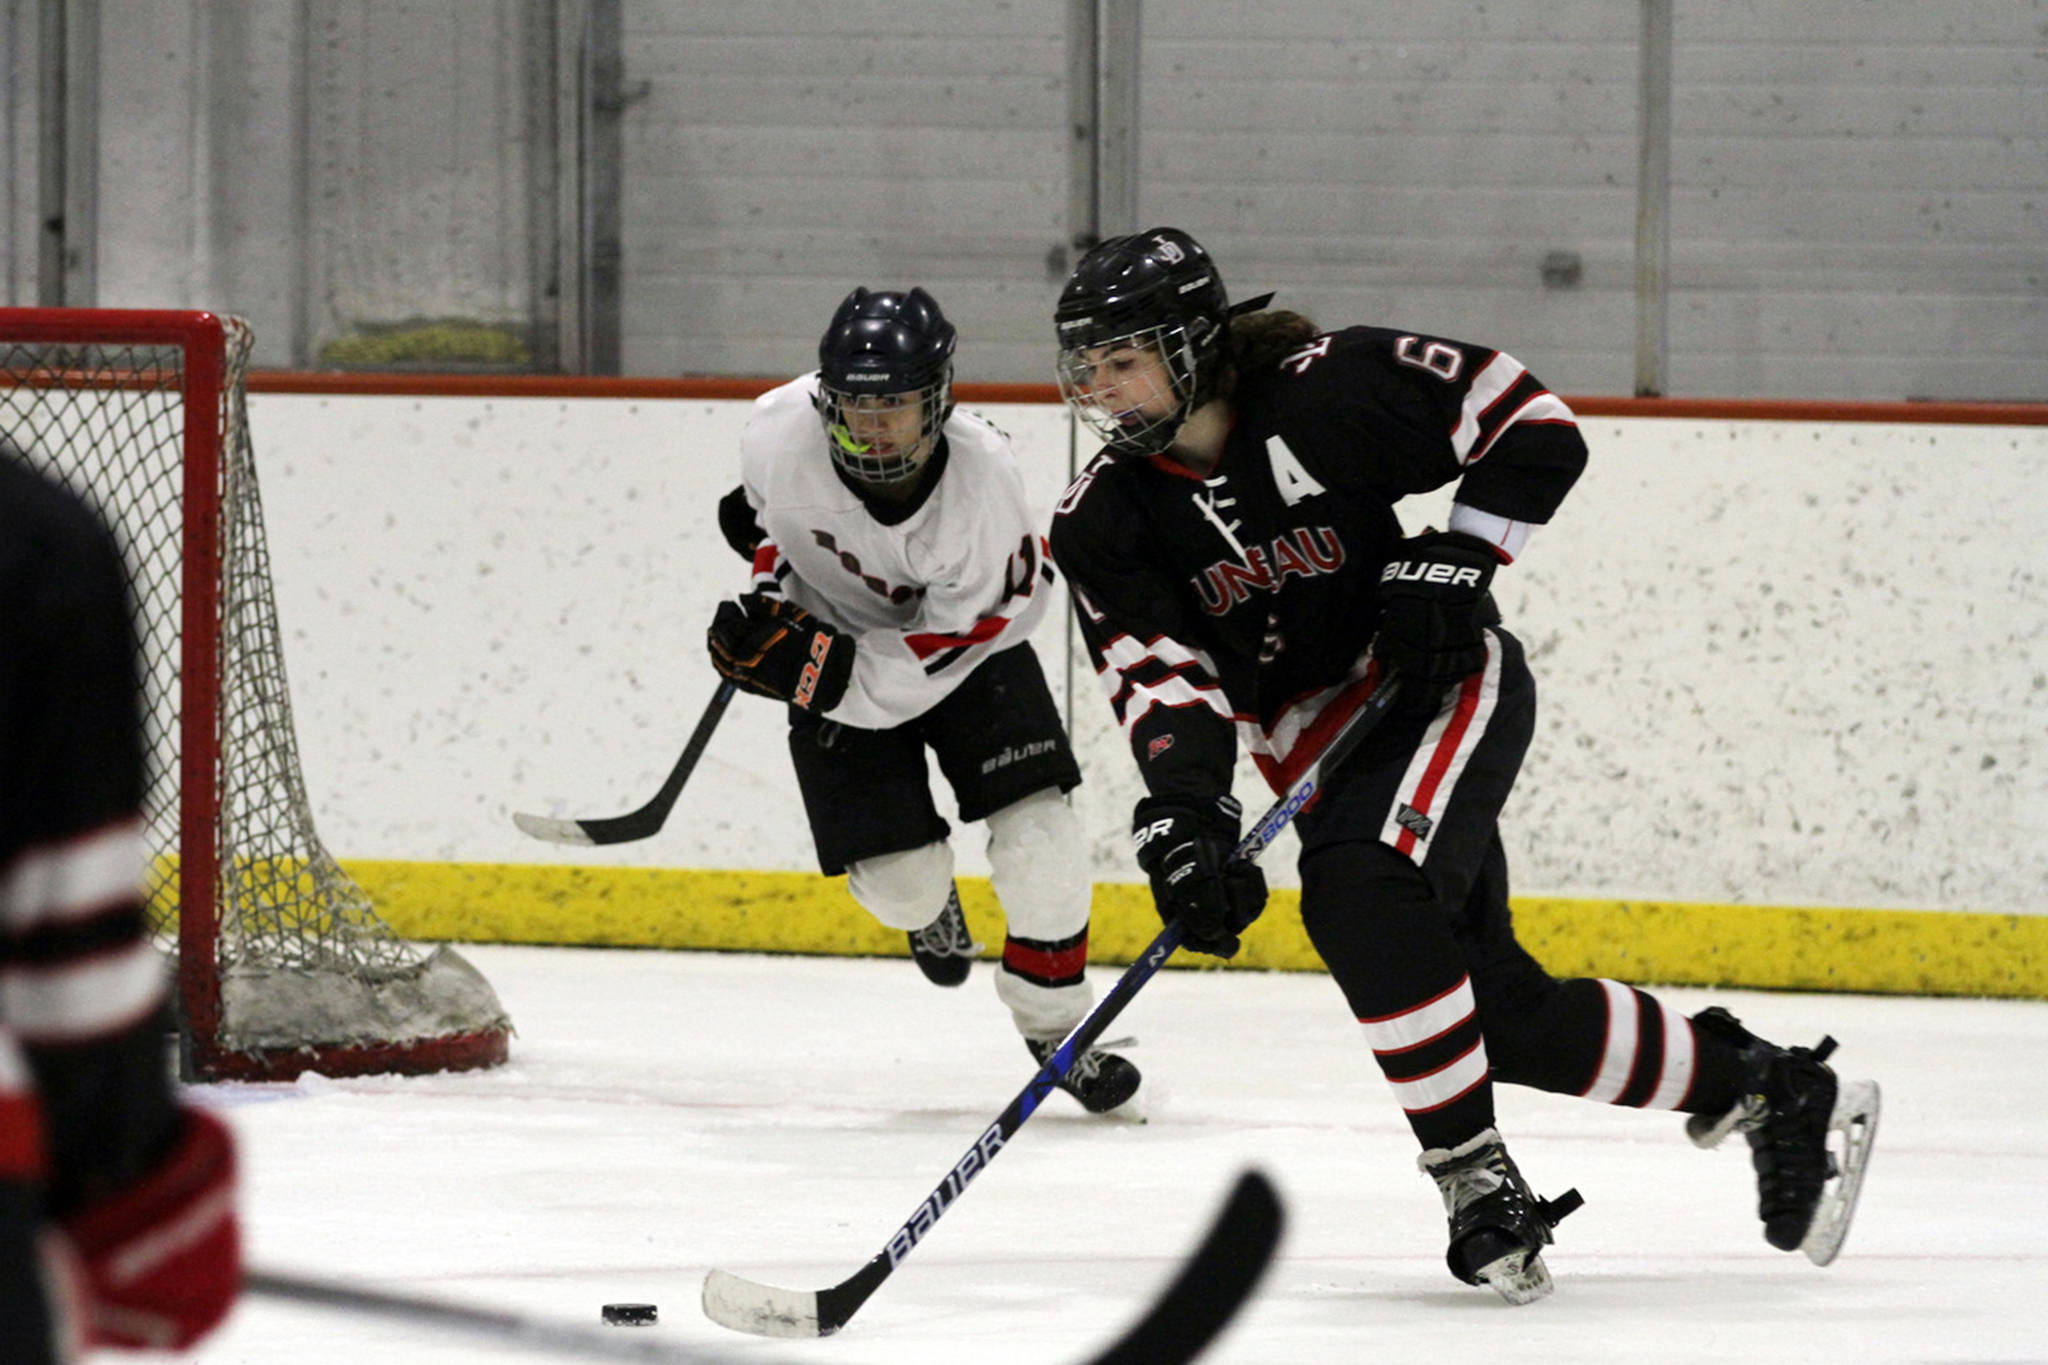 Juneau-Douglas’ Cameron Smith skates up the ice against Houston during the Big Lake Lions Christmas Classic Tournament last December in the Big Lake Lions Recreation Center. Houston plays JDHS this Friday and Saturday at Treadwell Arena. (Courtesy Photo | MatSuSports.net)